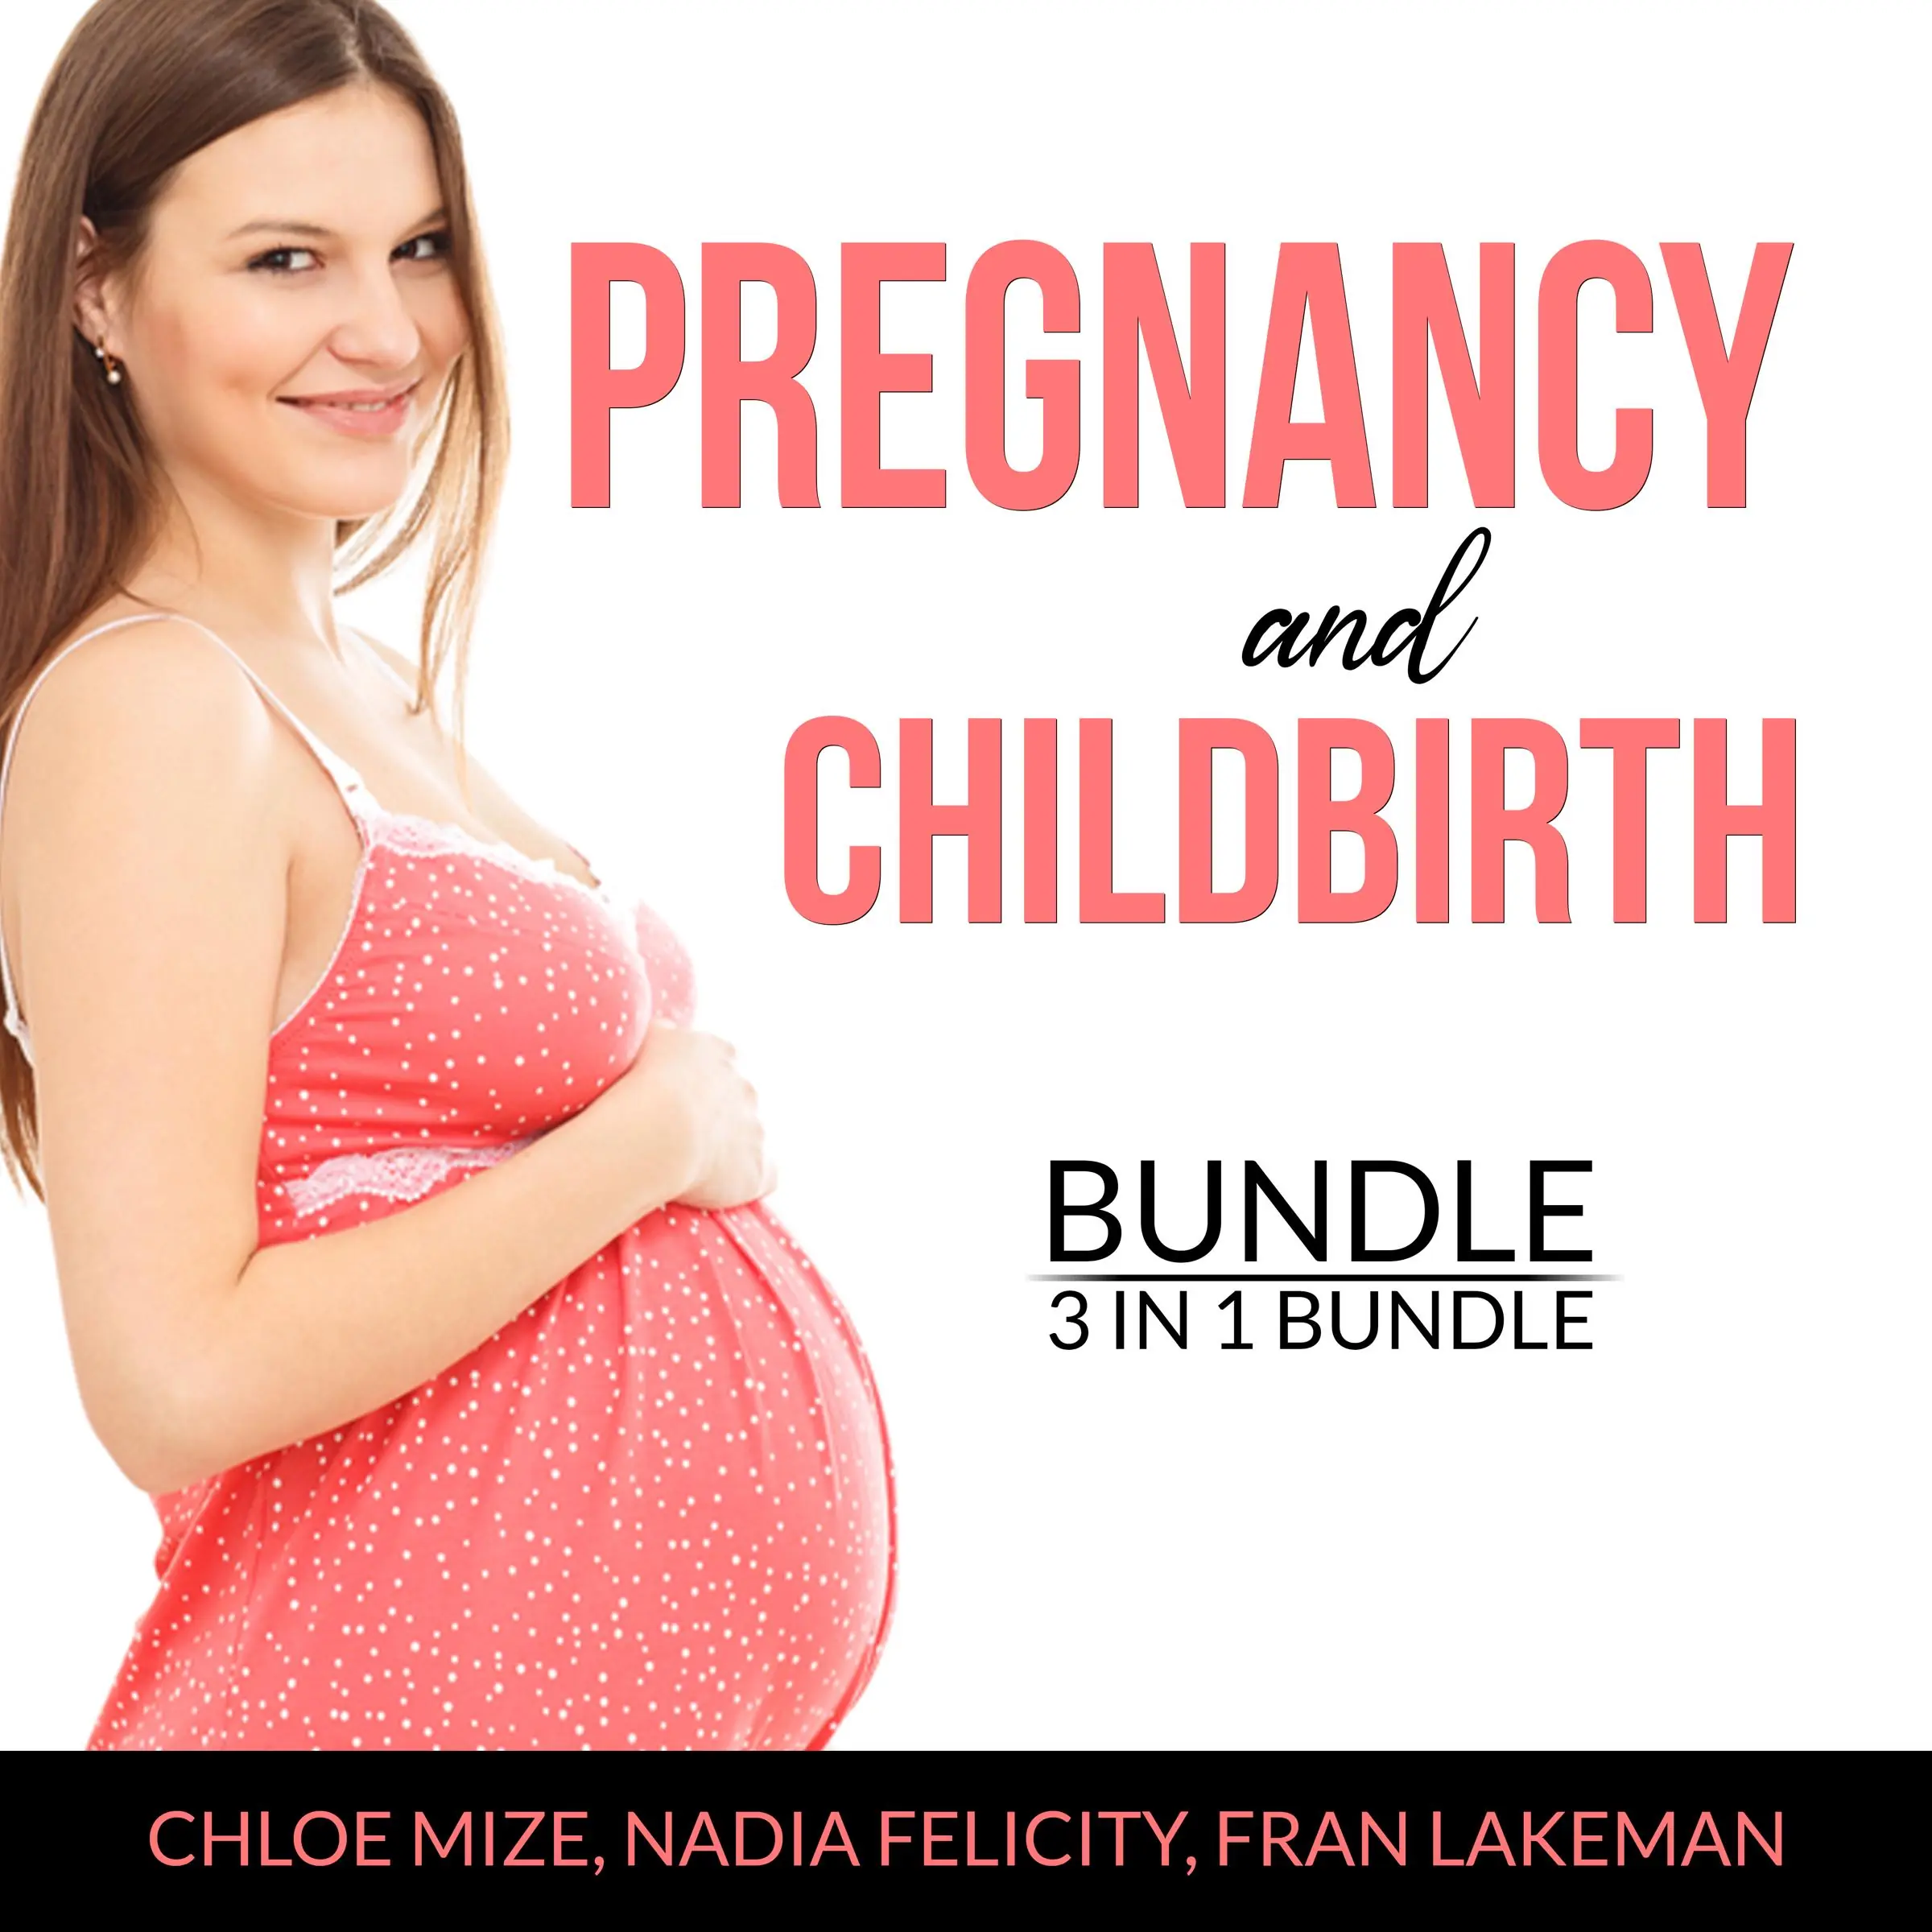 Pregnancy and Childbirth Bundle, 3 in 1 Bundle: Pregnancy Brain,  Pregnancy Food and Expecting Better Audiobook by and Fran Lakeman